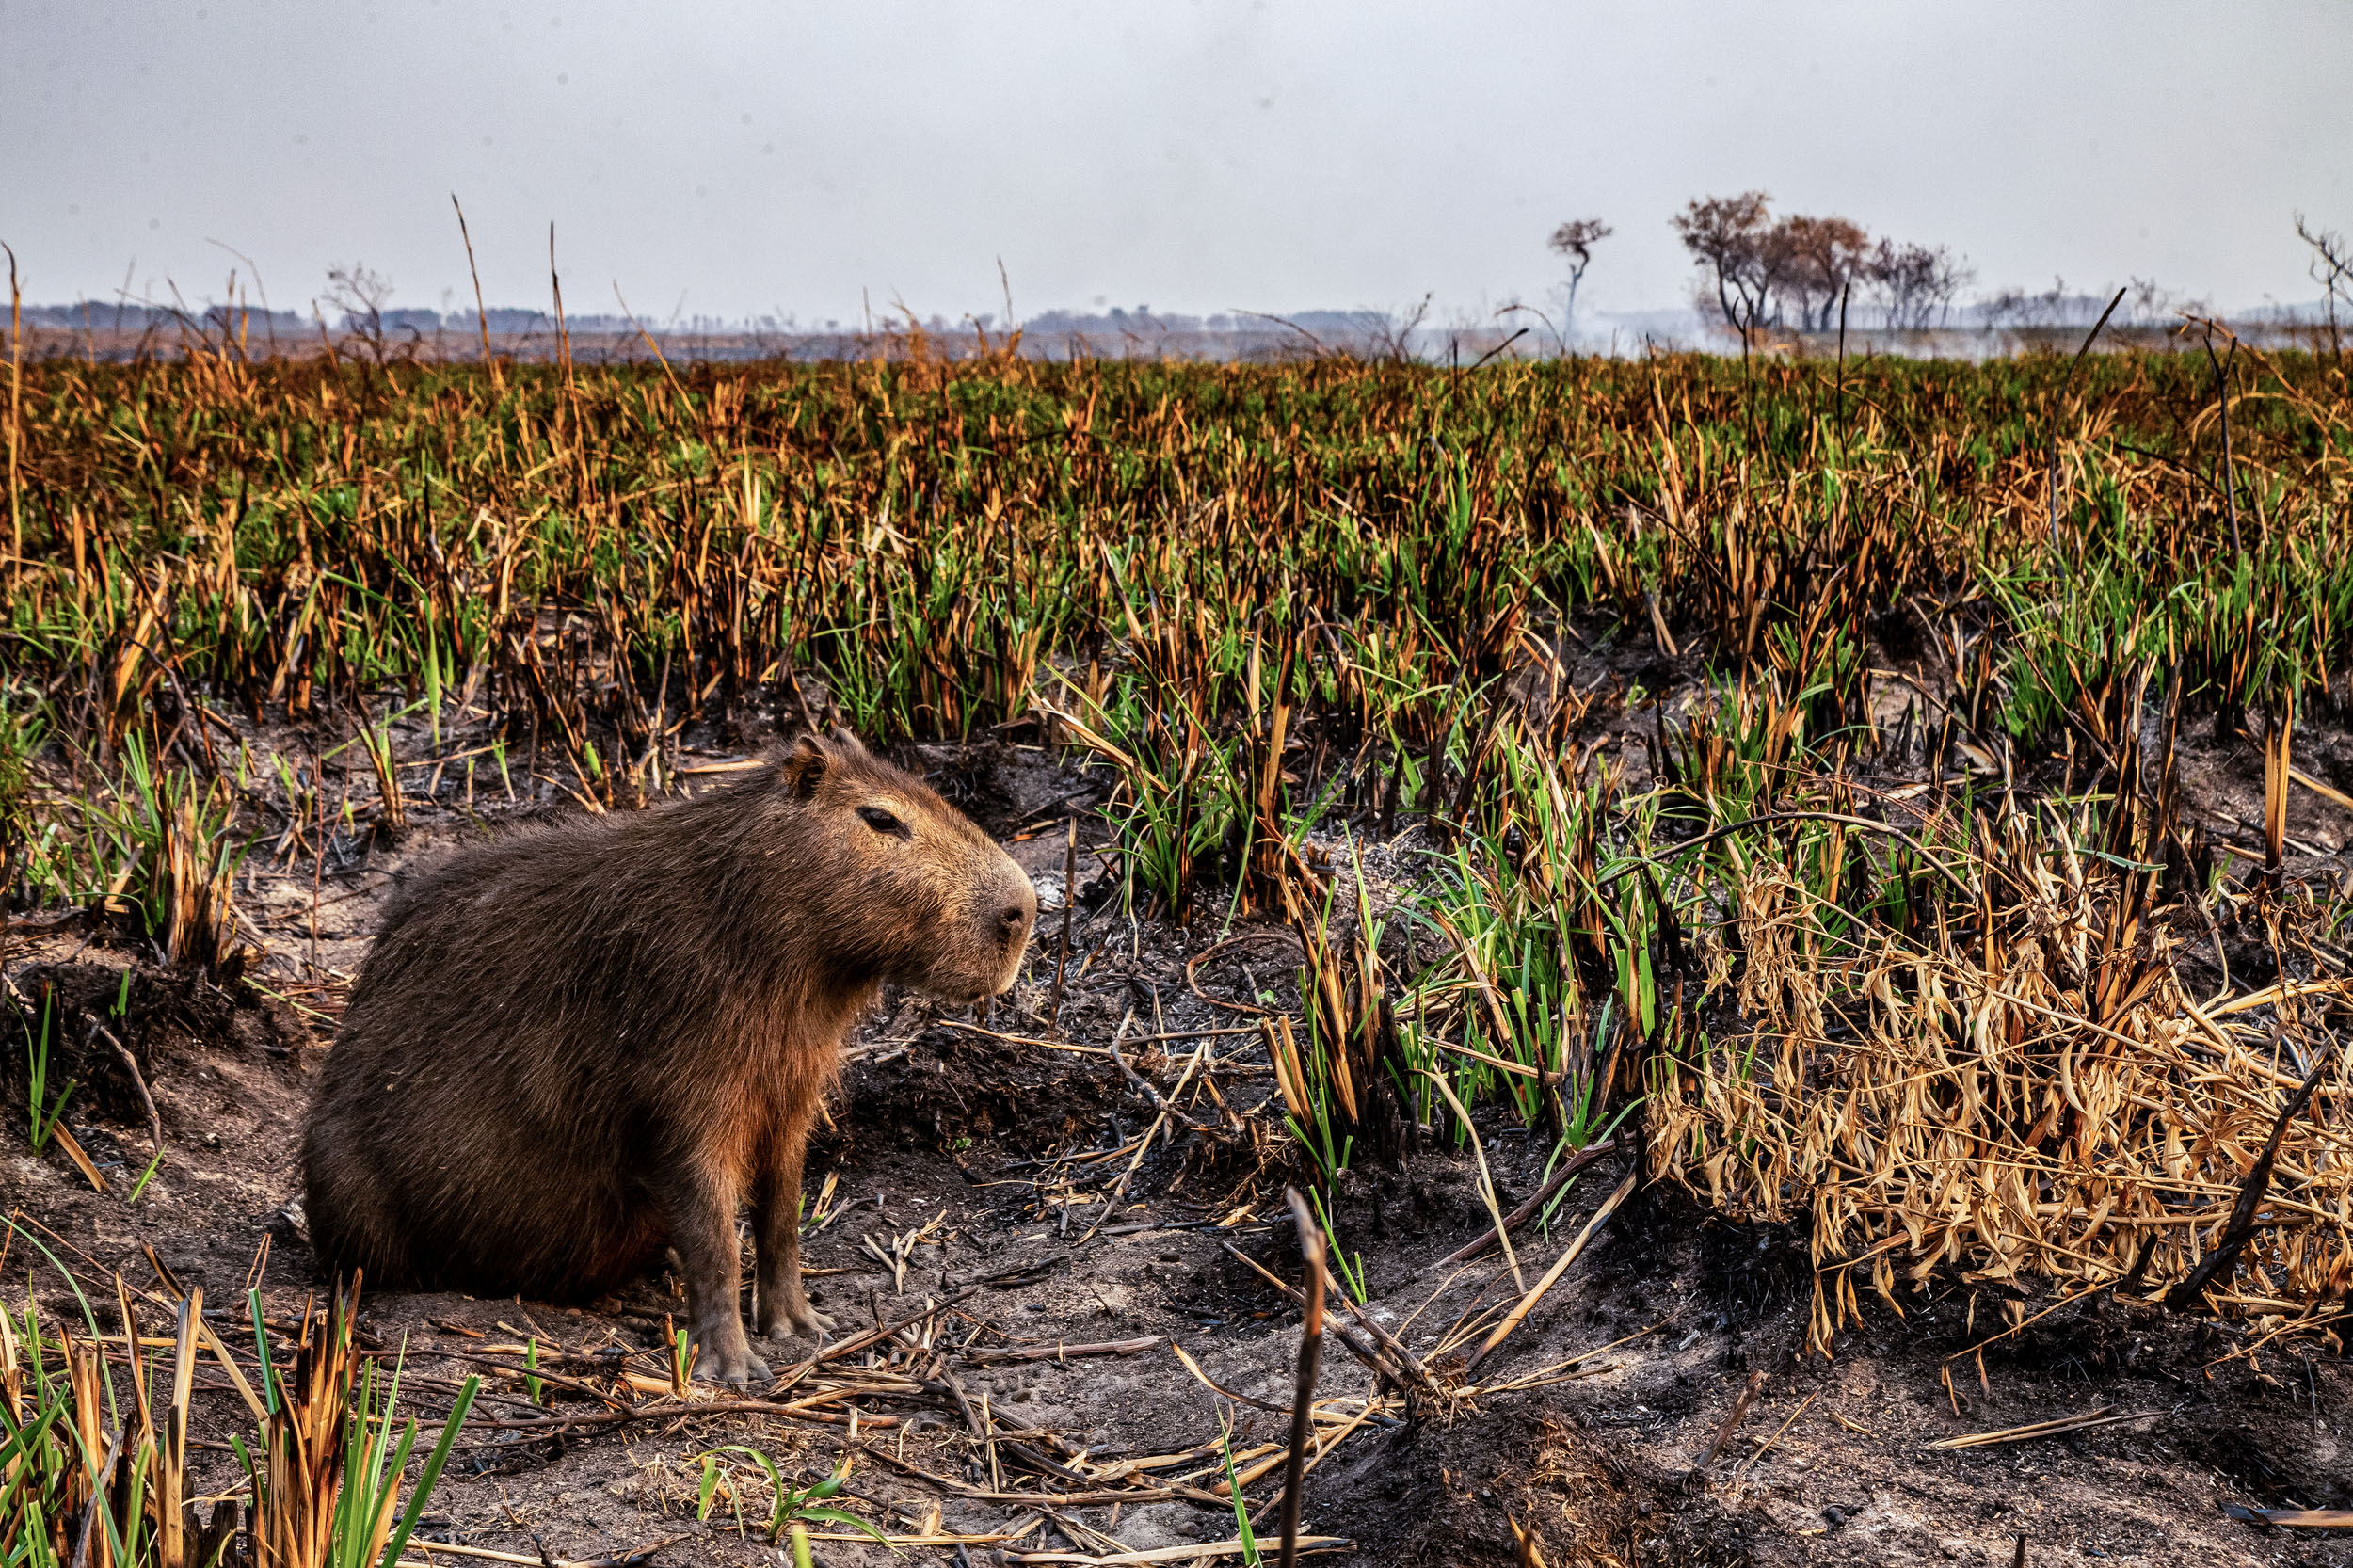 A capybara stands on dry land with crisp golden grasses. Smoke rises into the air on the horizon.